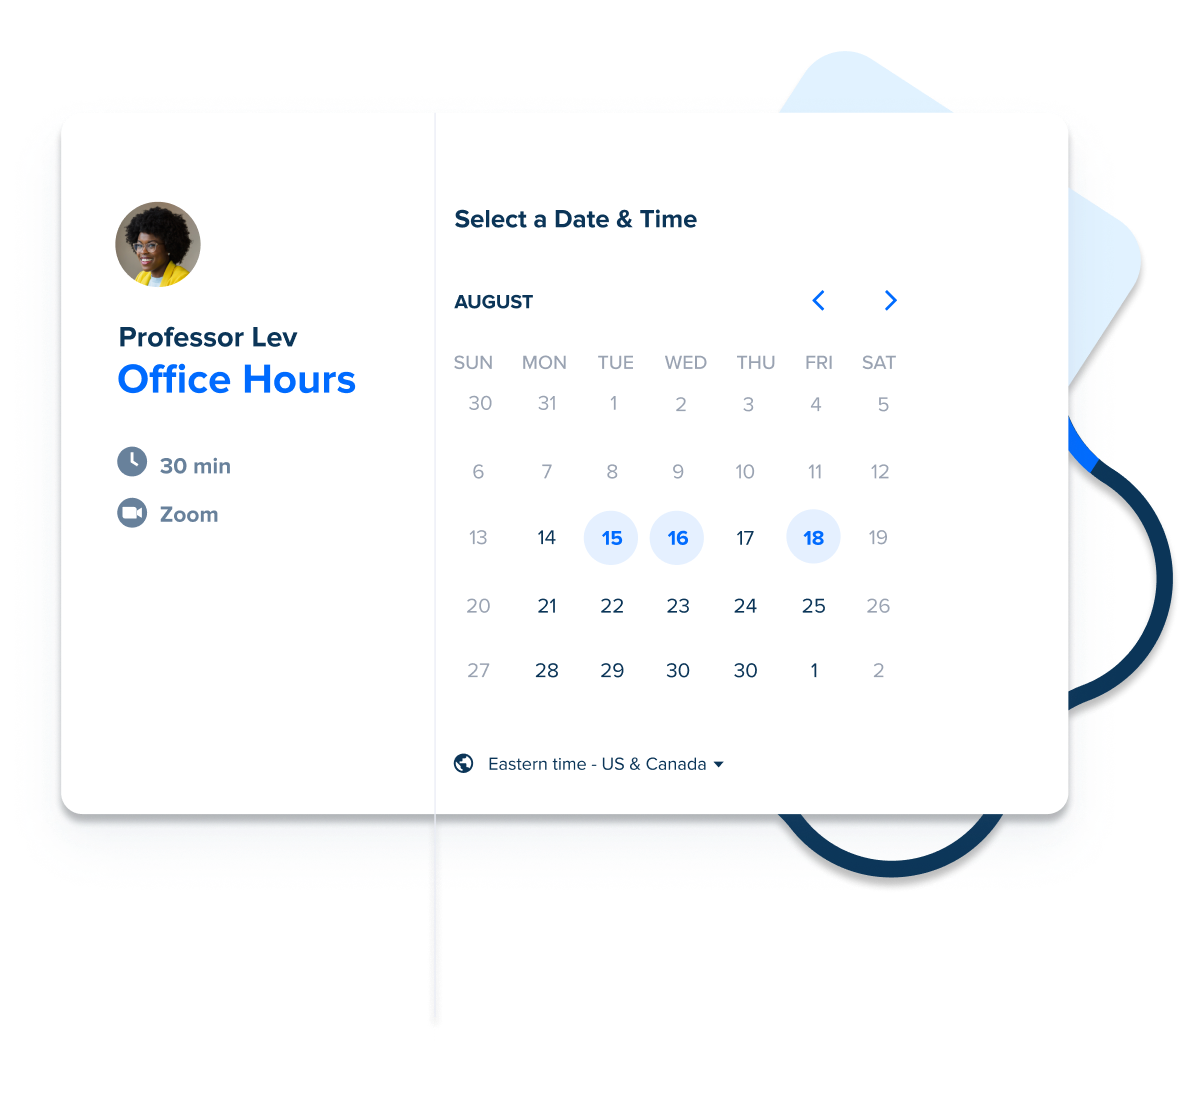 Control your office hours